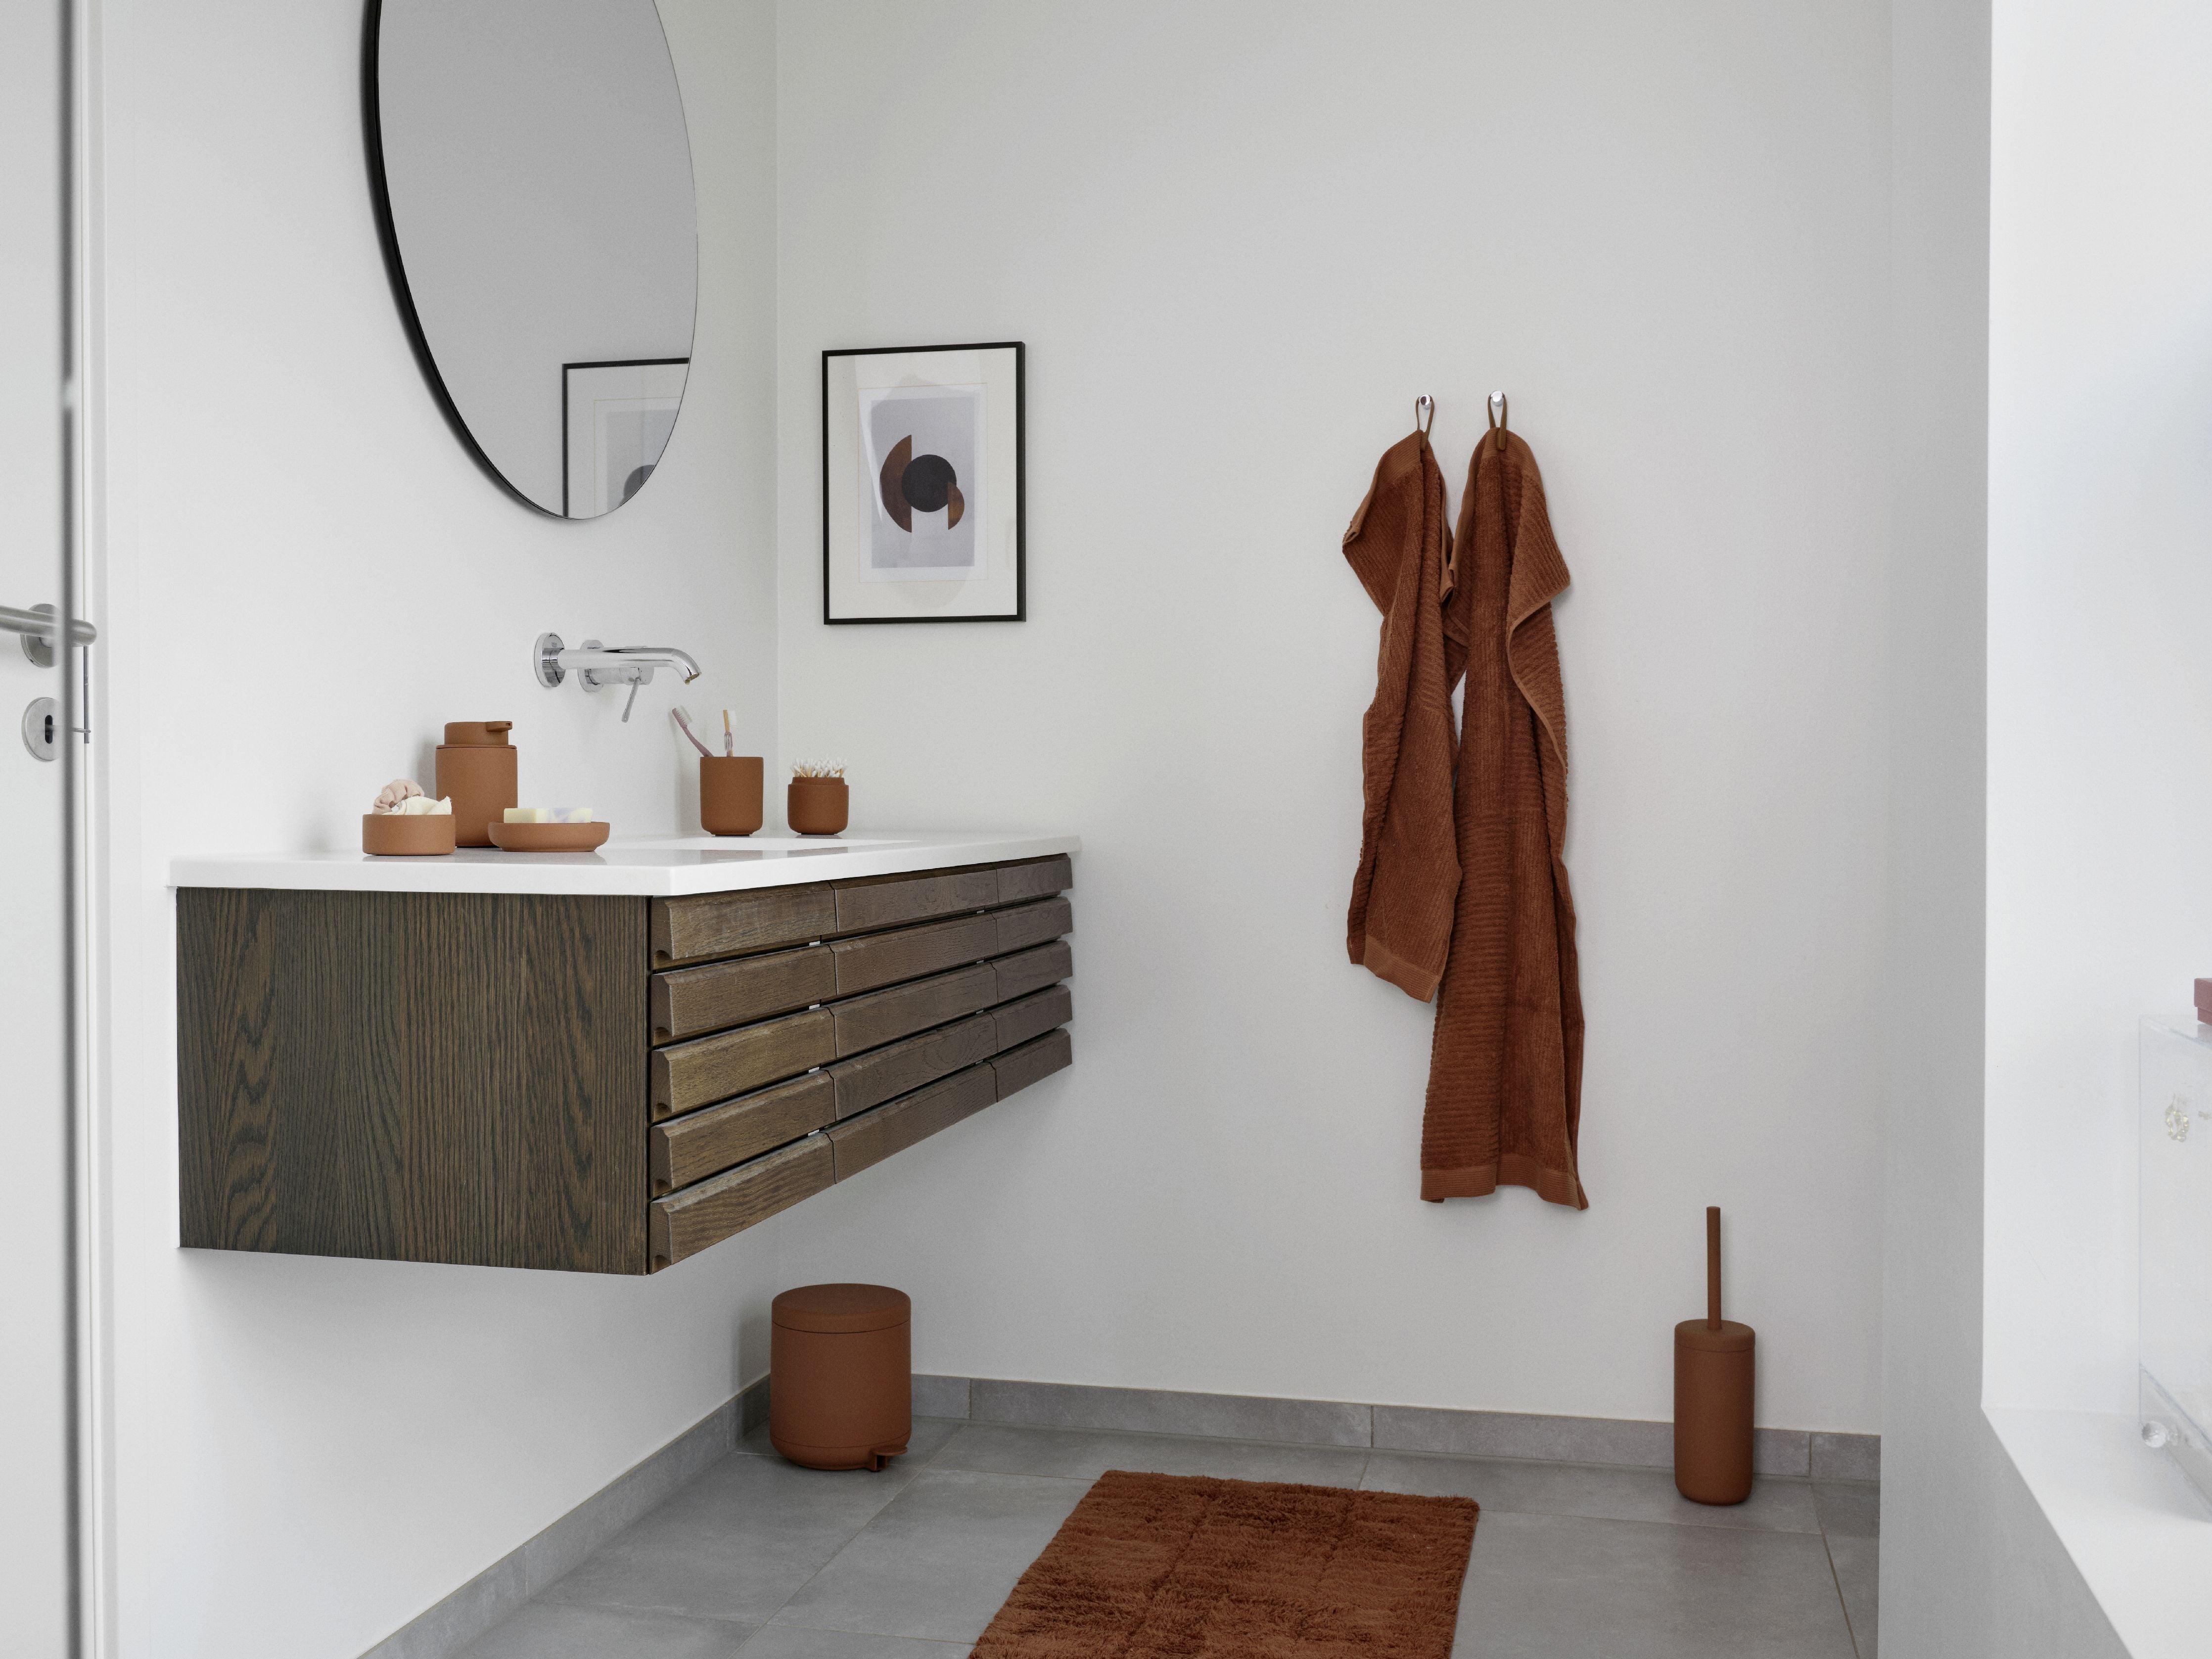 A white bathroom with brown towels, a Zone Denmark Ume Pedal Bin 4 Liter in terracotta, and a mirror.